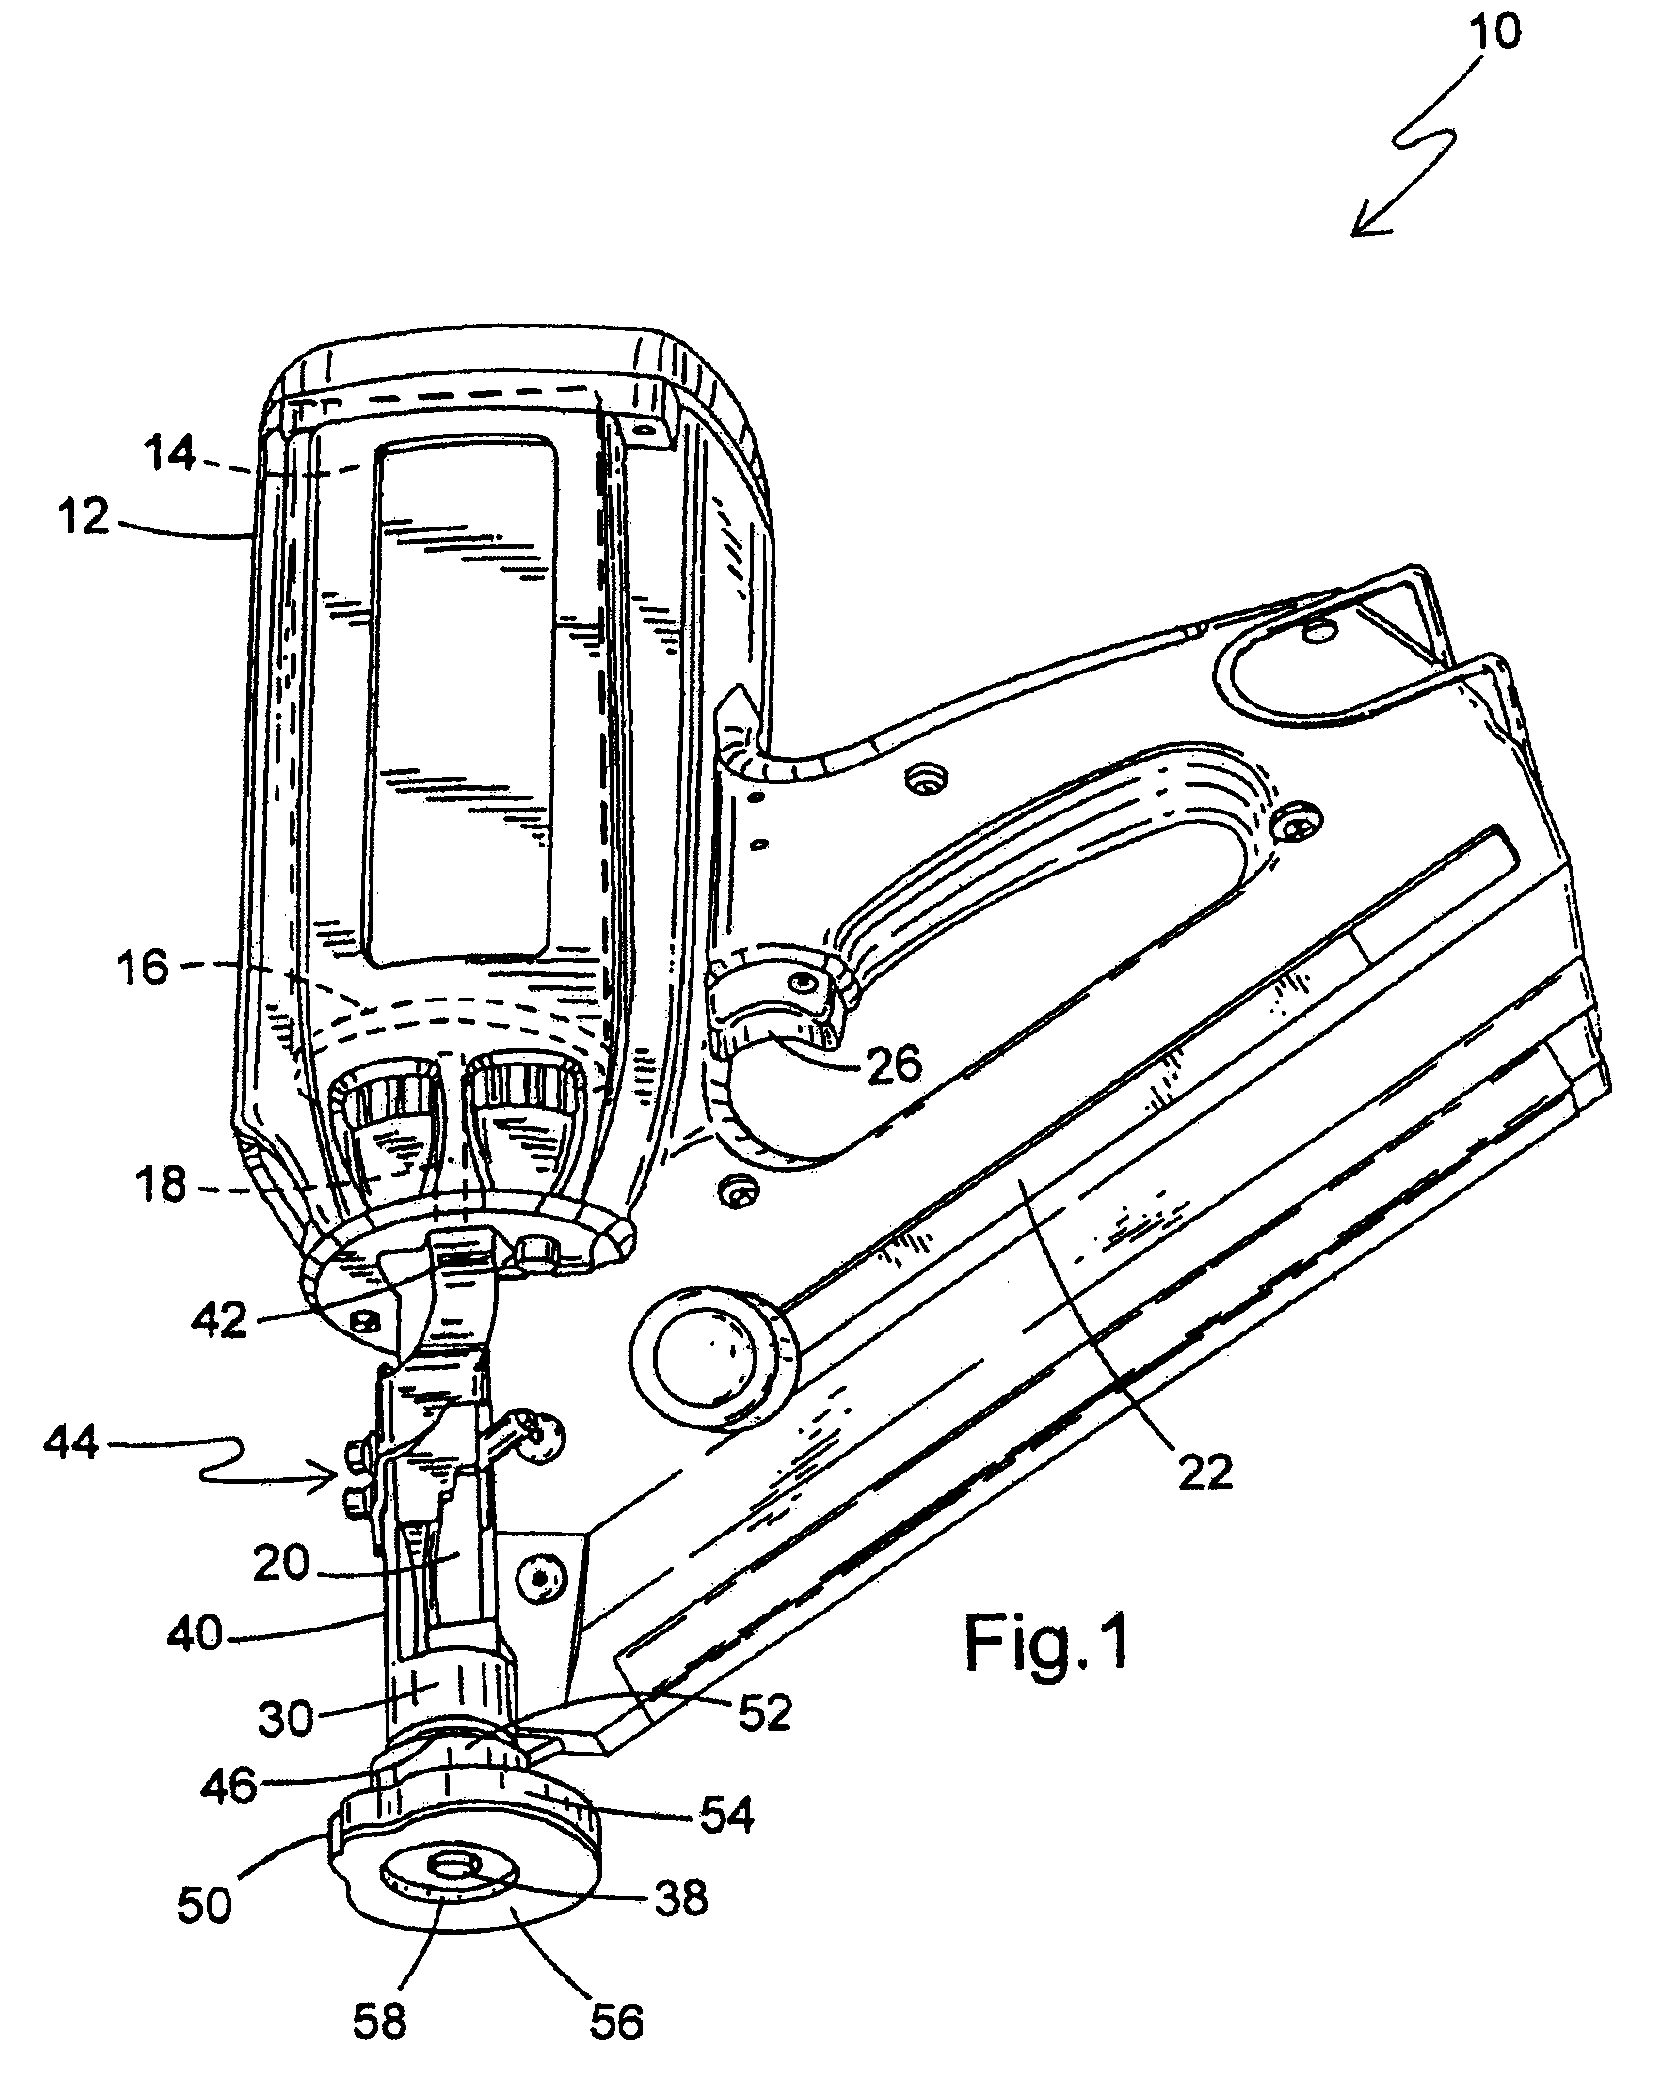 Depth of drive control with load transfer for fastener driver